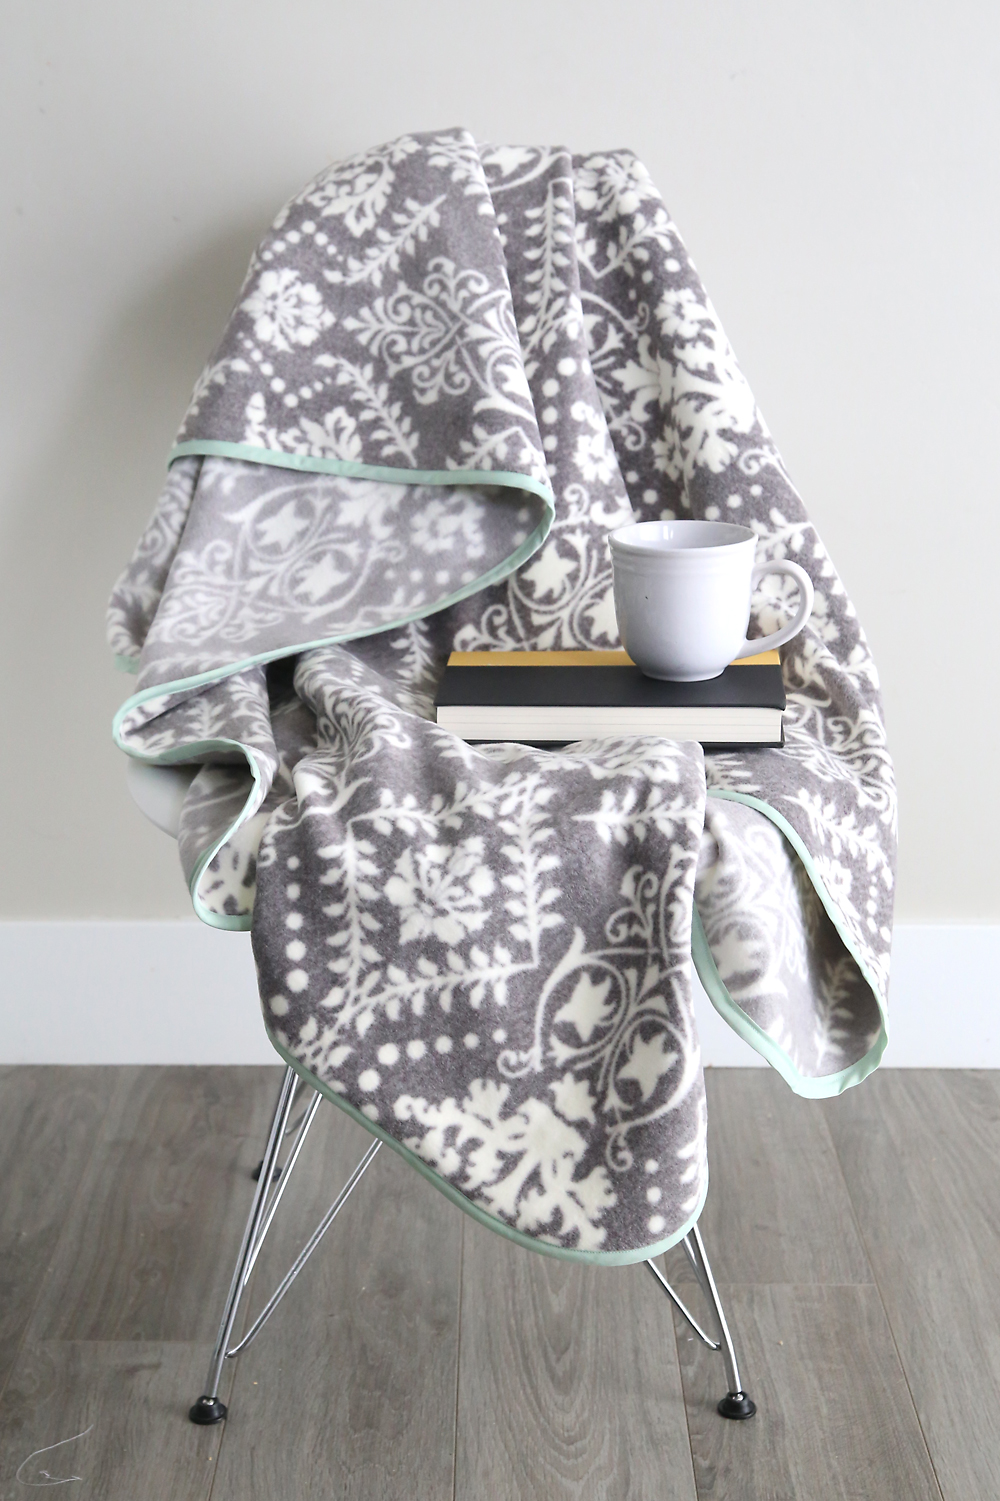 DIY fleece blanket with bias trim draped over a chair